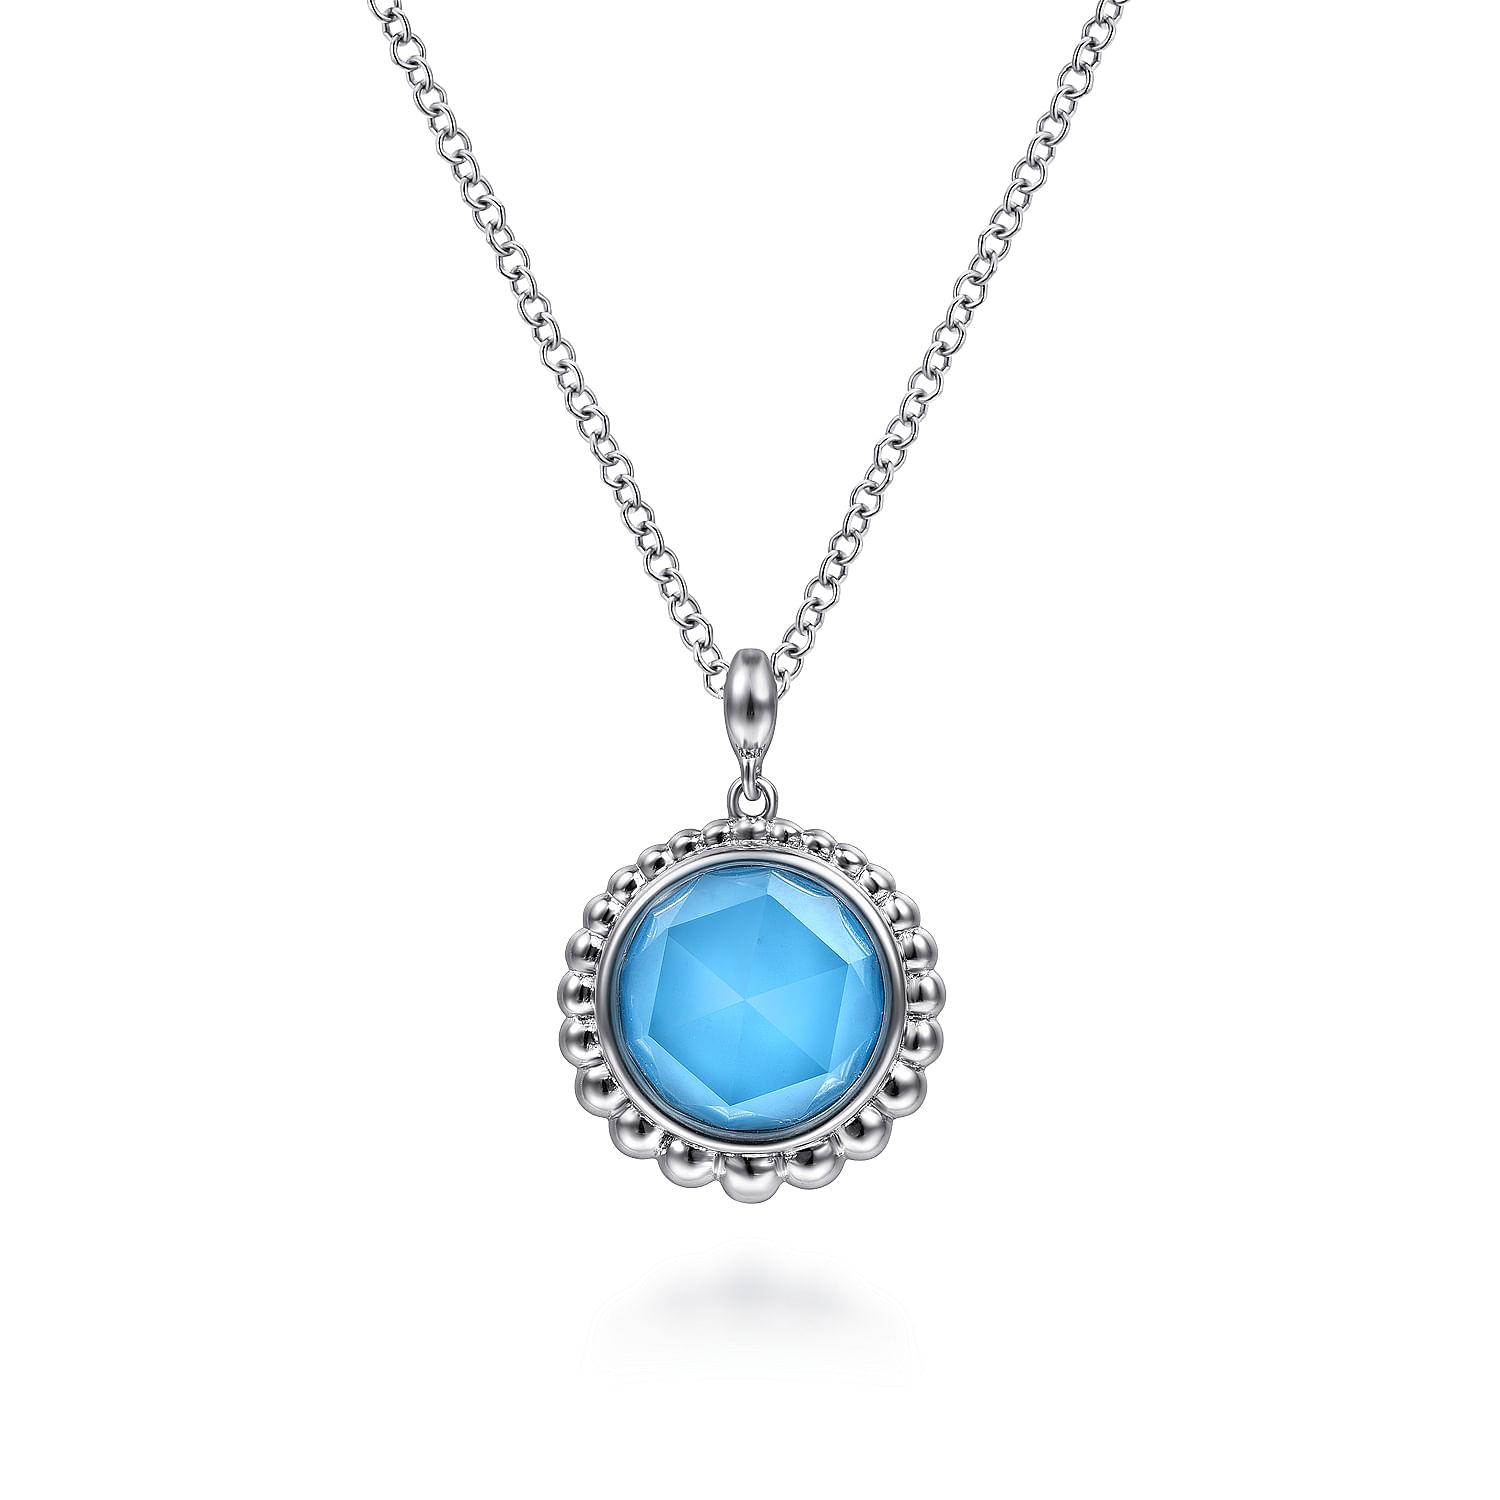 Gabriel - 925 Sterling Silver Rock Crystal and Turquoise Pendant Necklace